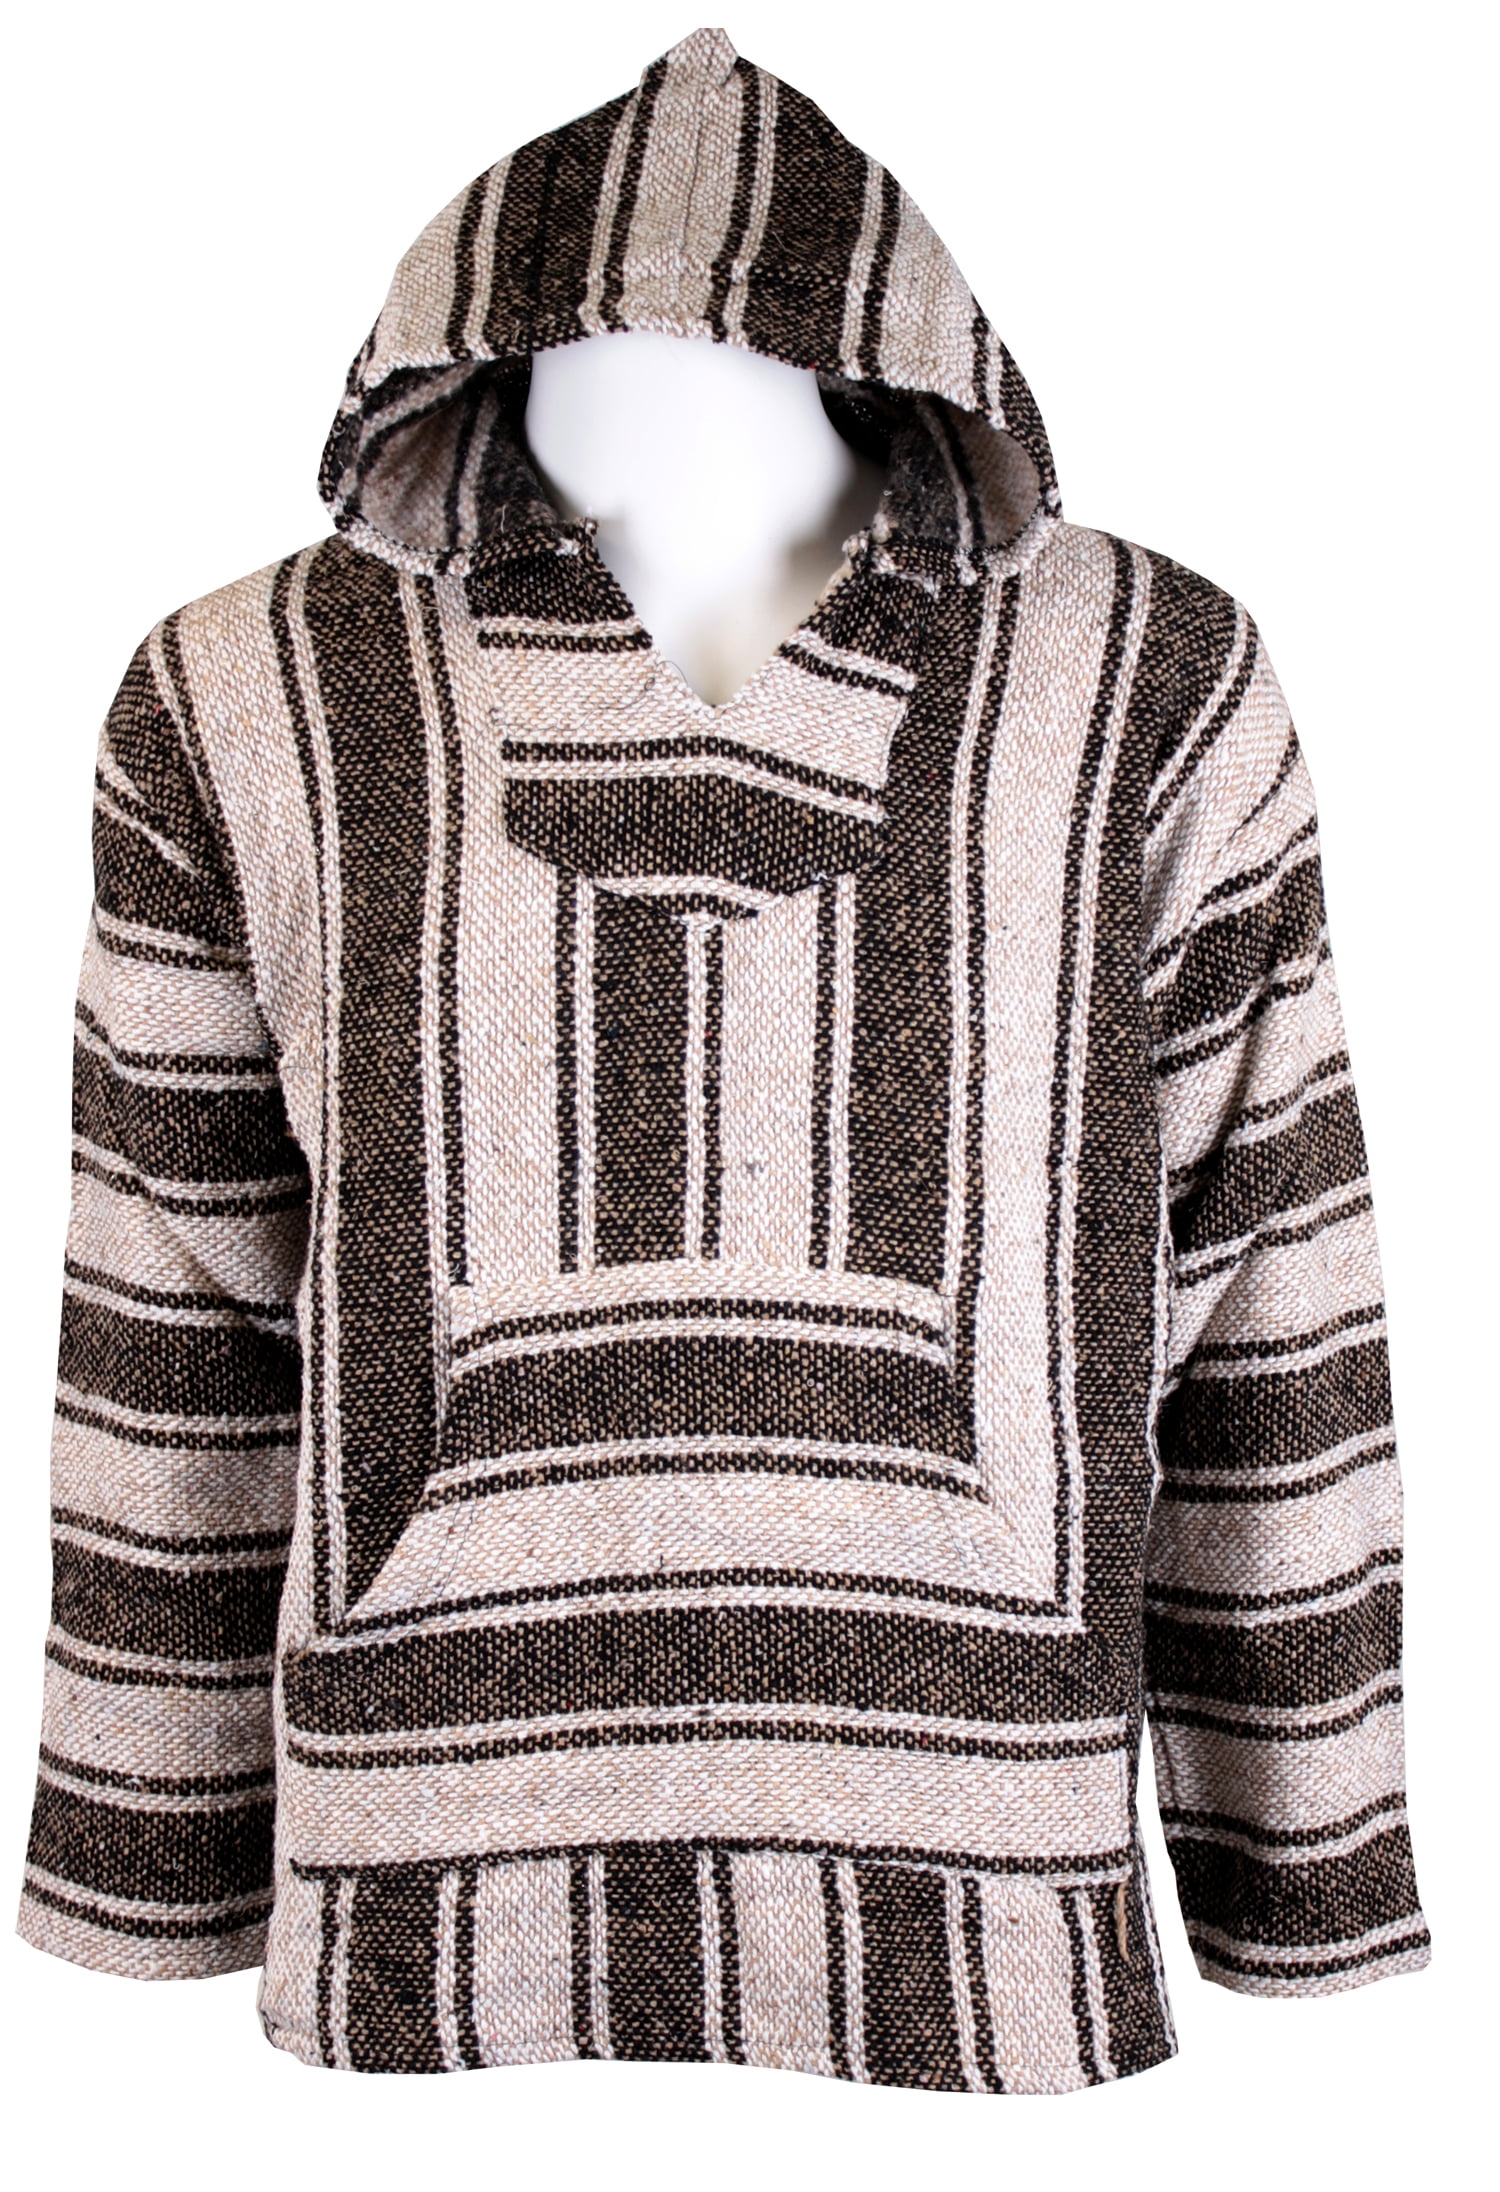 Woven Pullover Sweater Jacket Authentic Mexican Baja Hoodie 